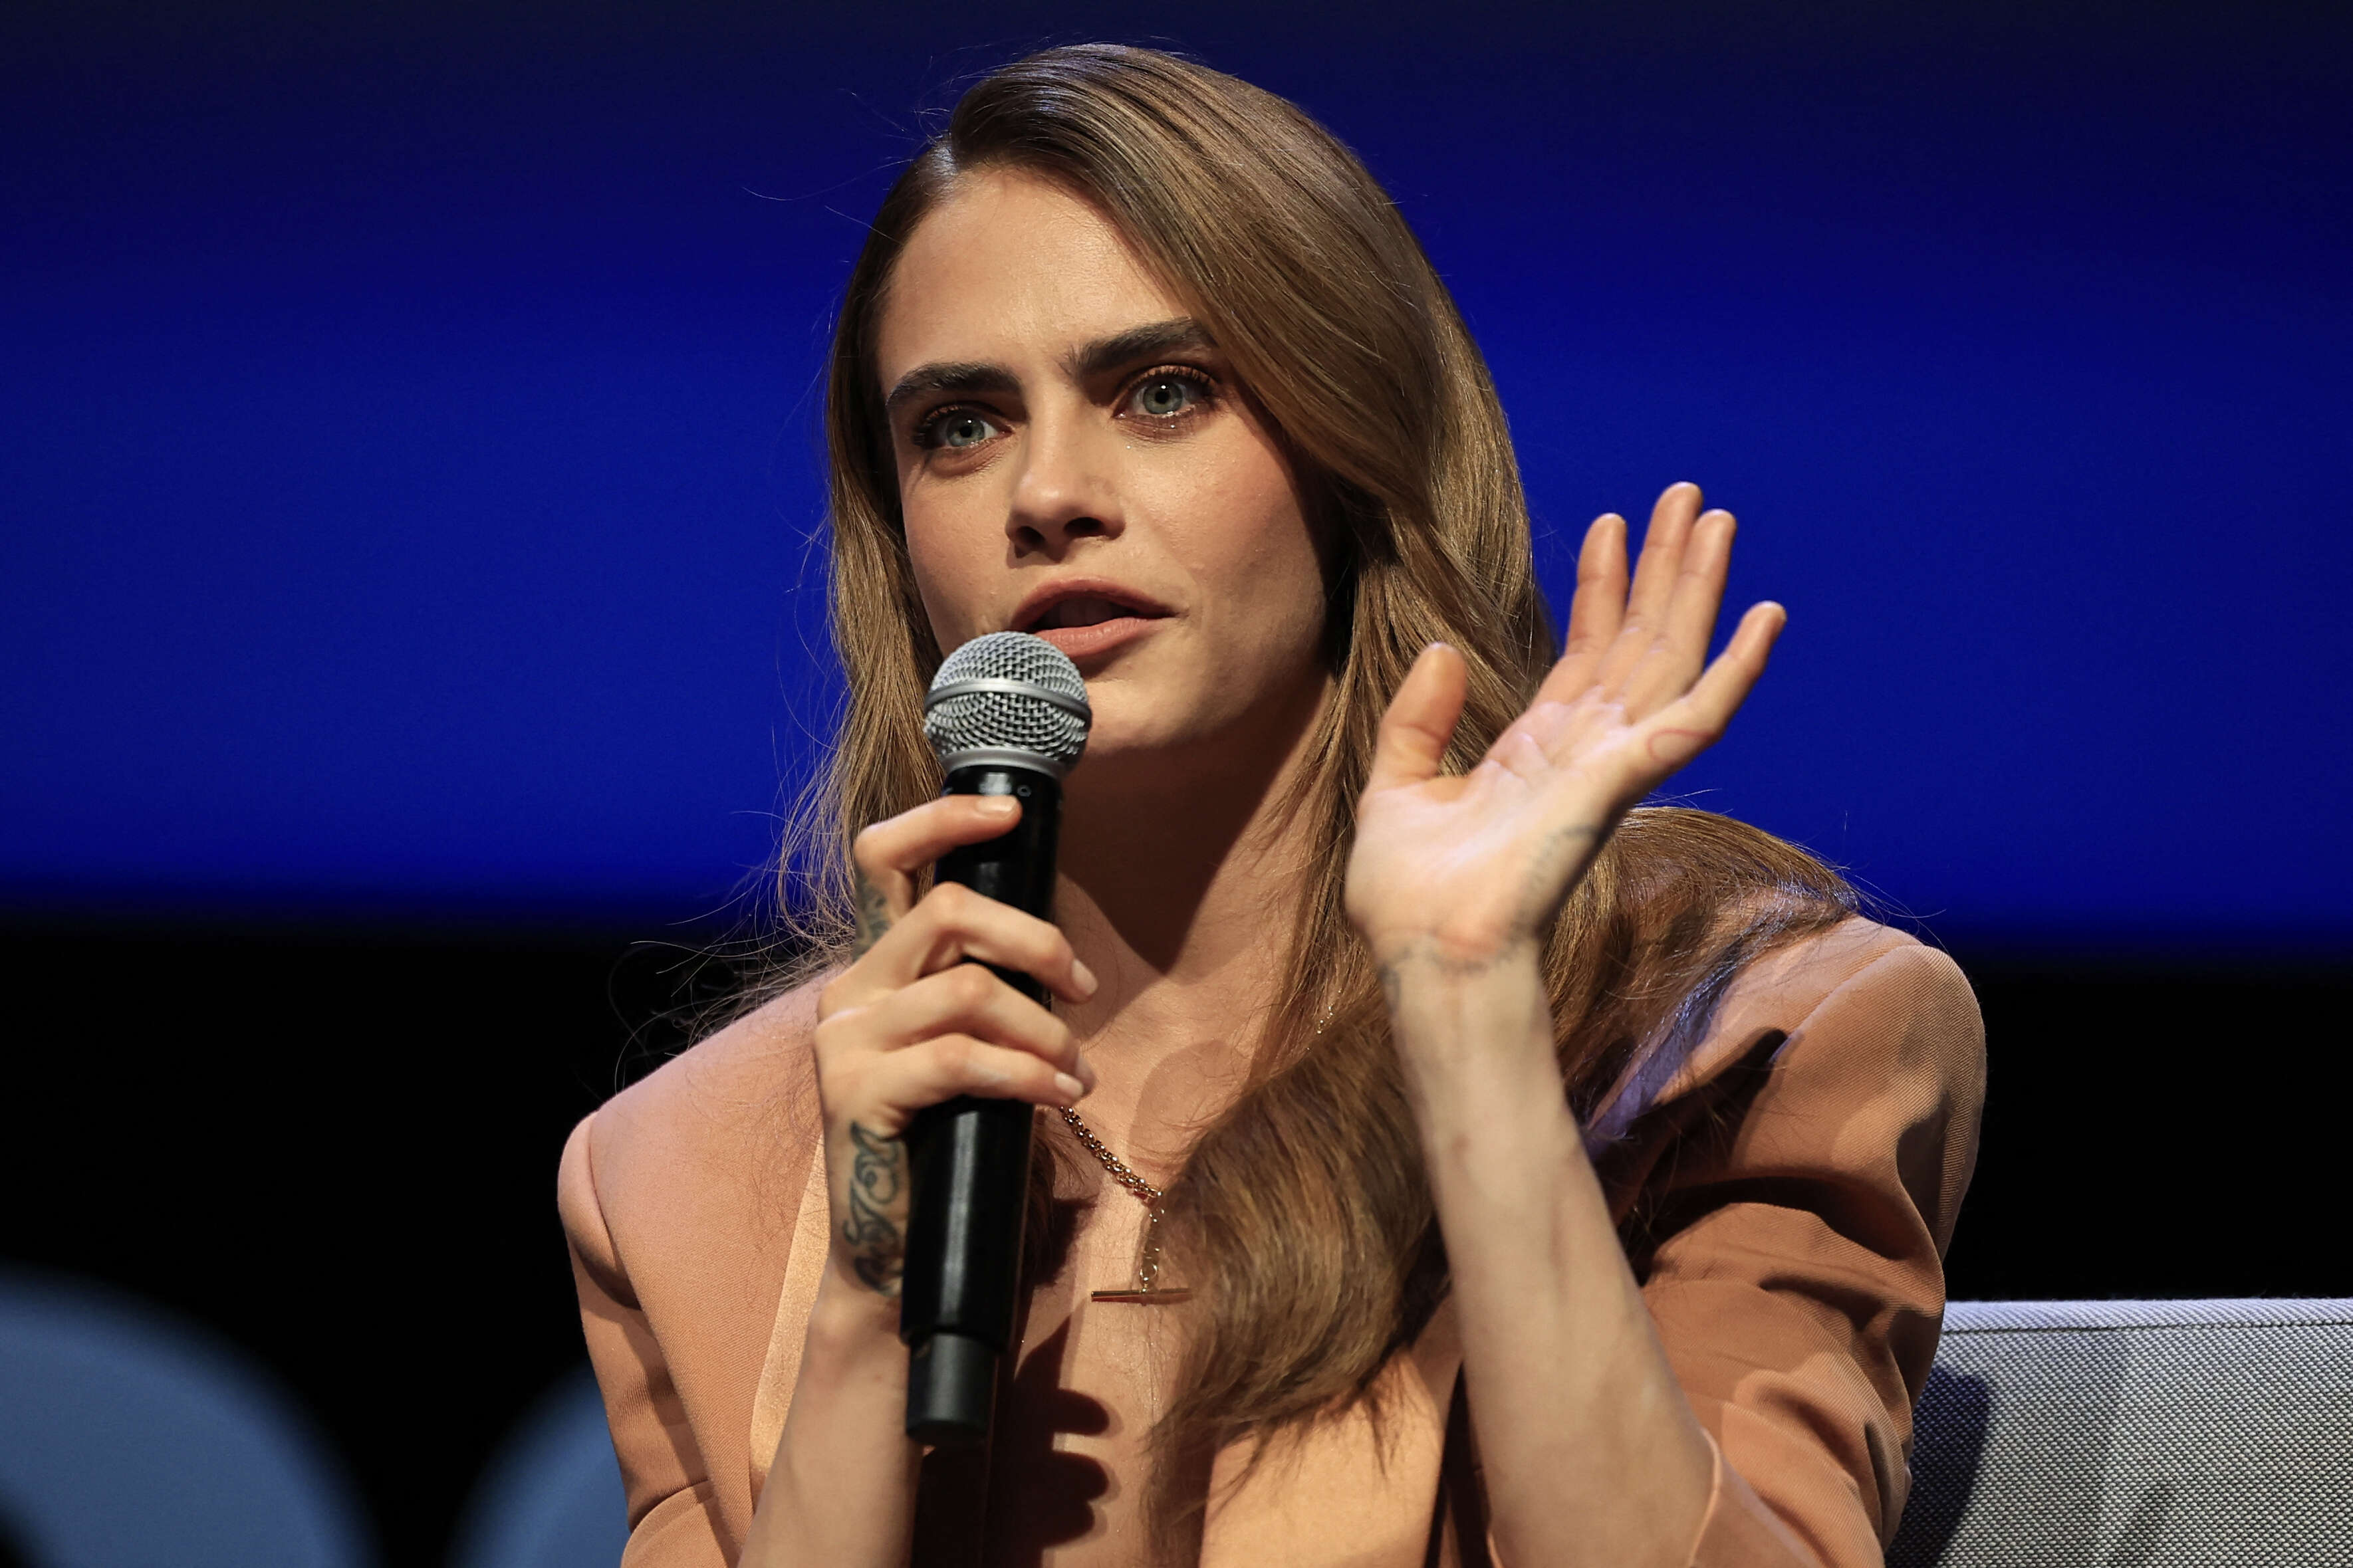 British model and actress Cara Delevingne talks as she attends the presentation of her documentary series 